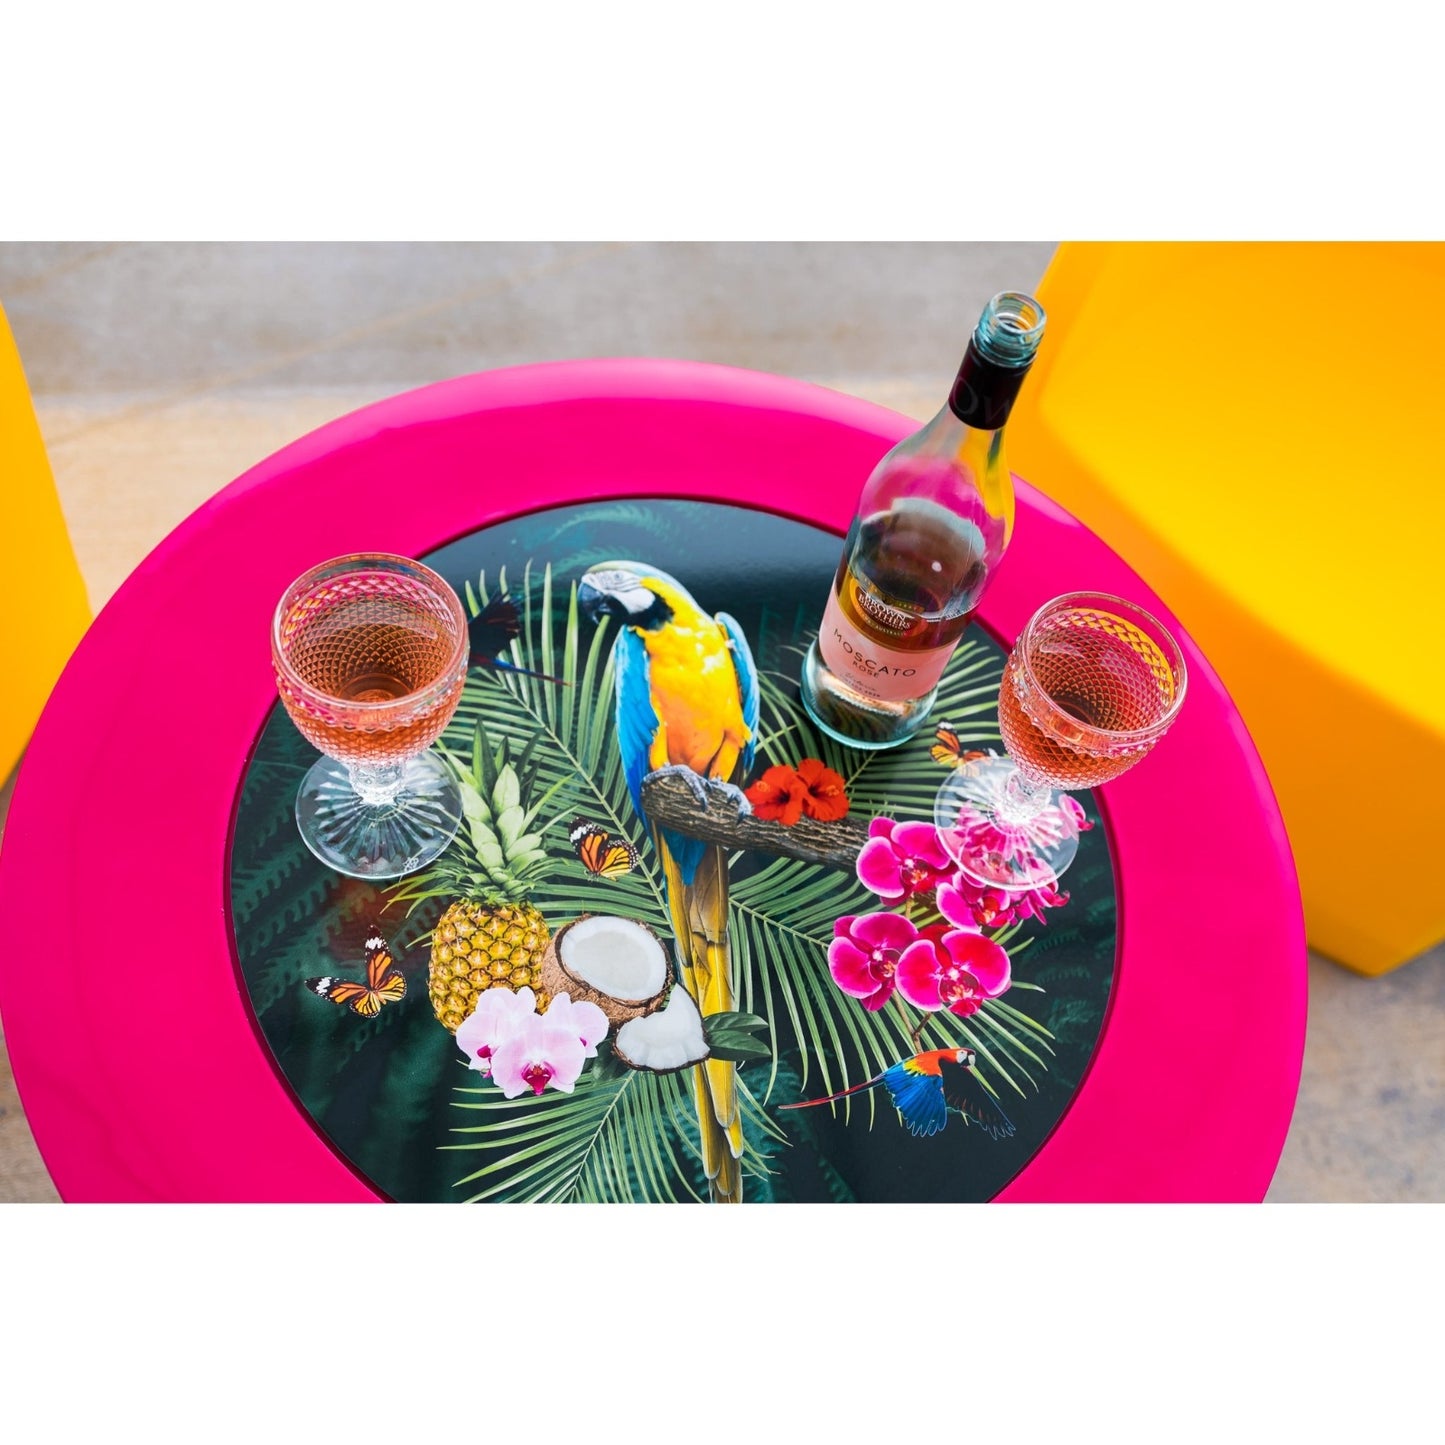 Bright yellow and pink Modscene outdoor furniture on a patio. Outdoor furniture New Zealand.